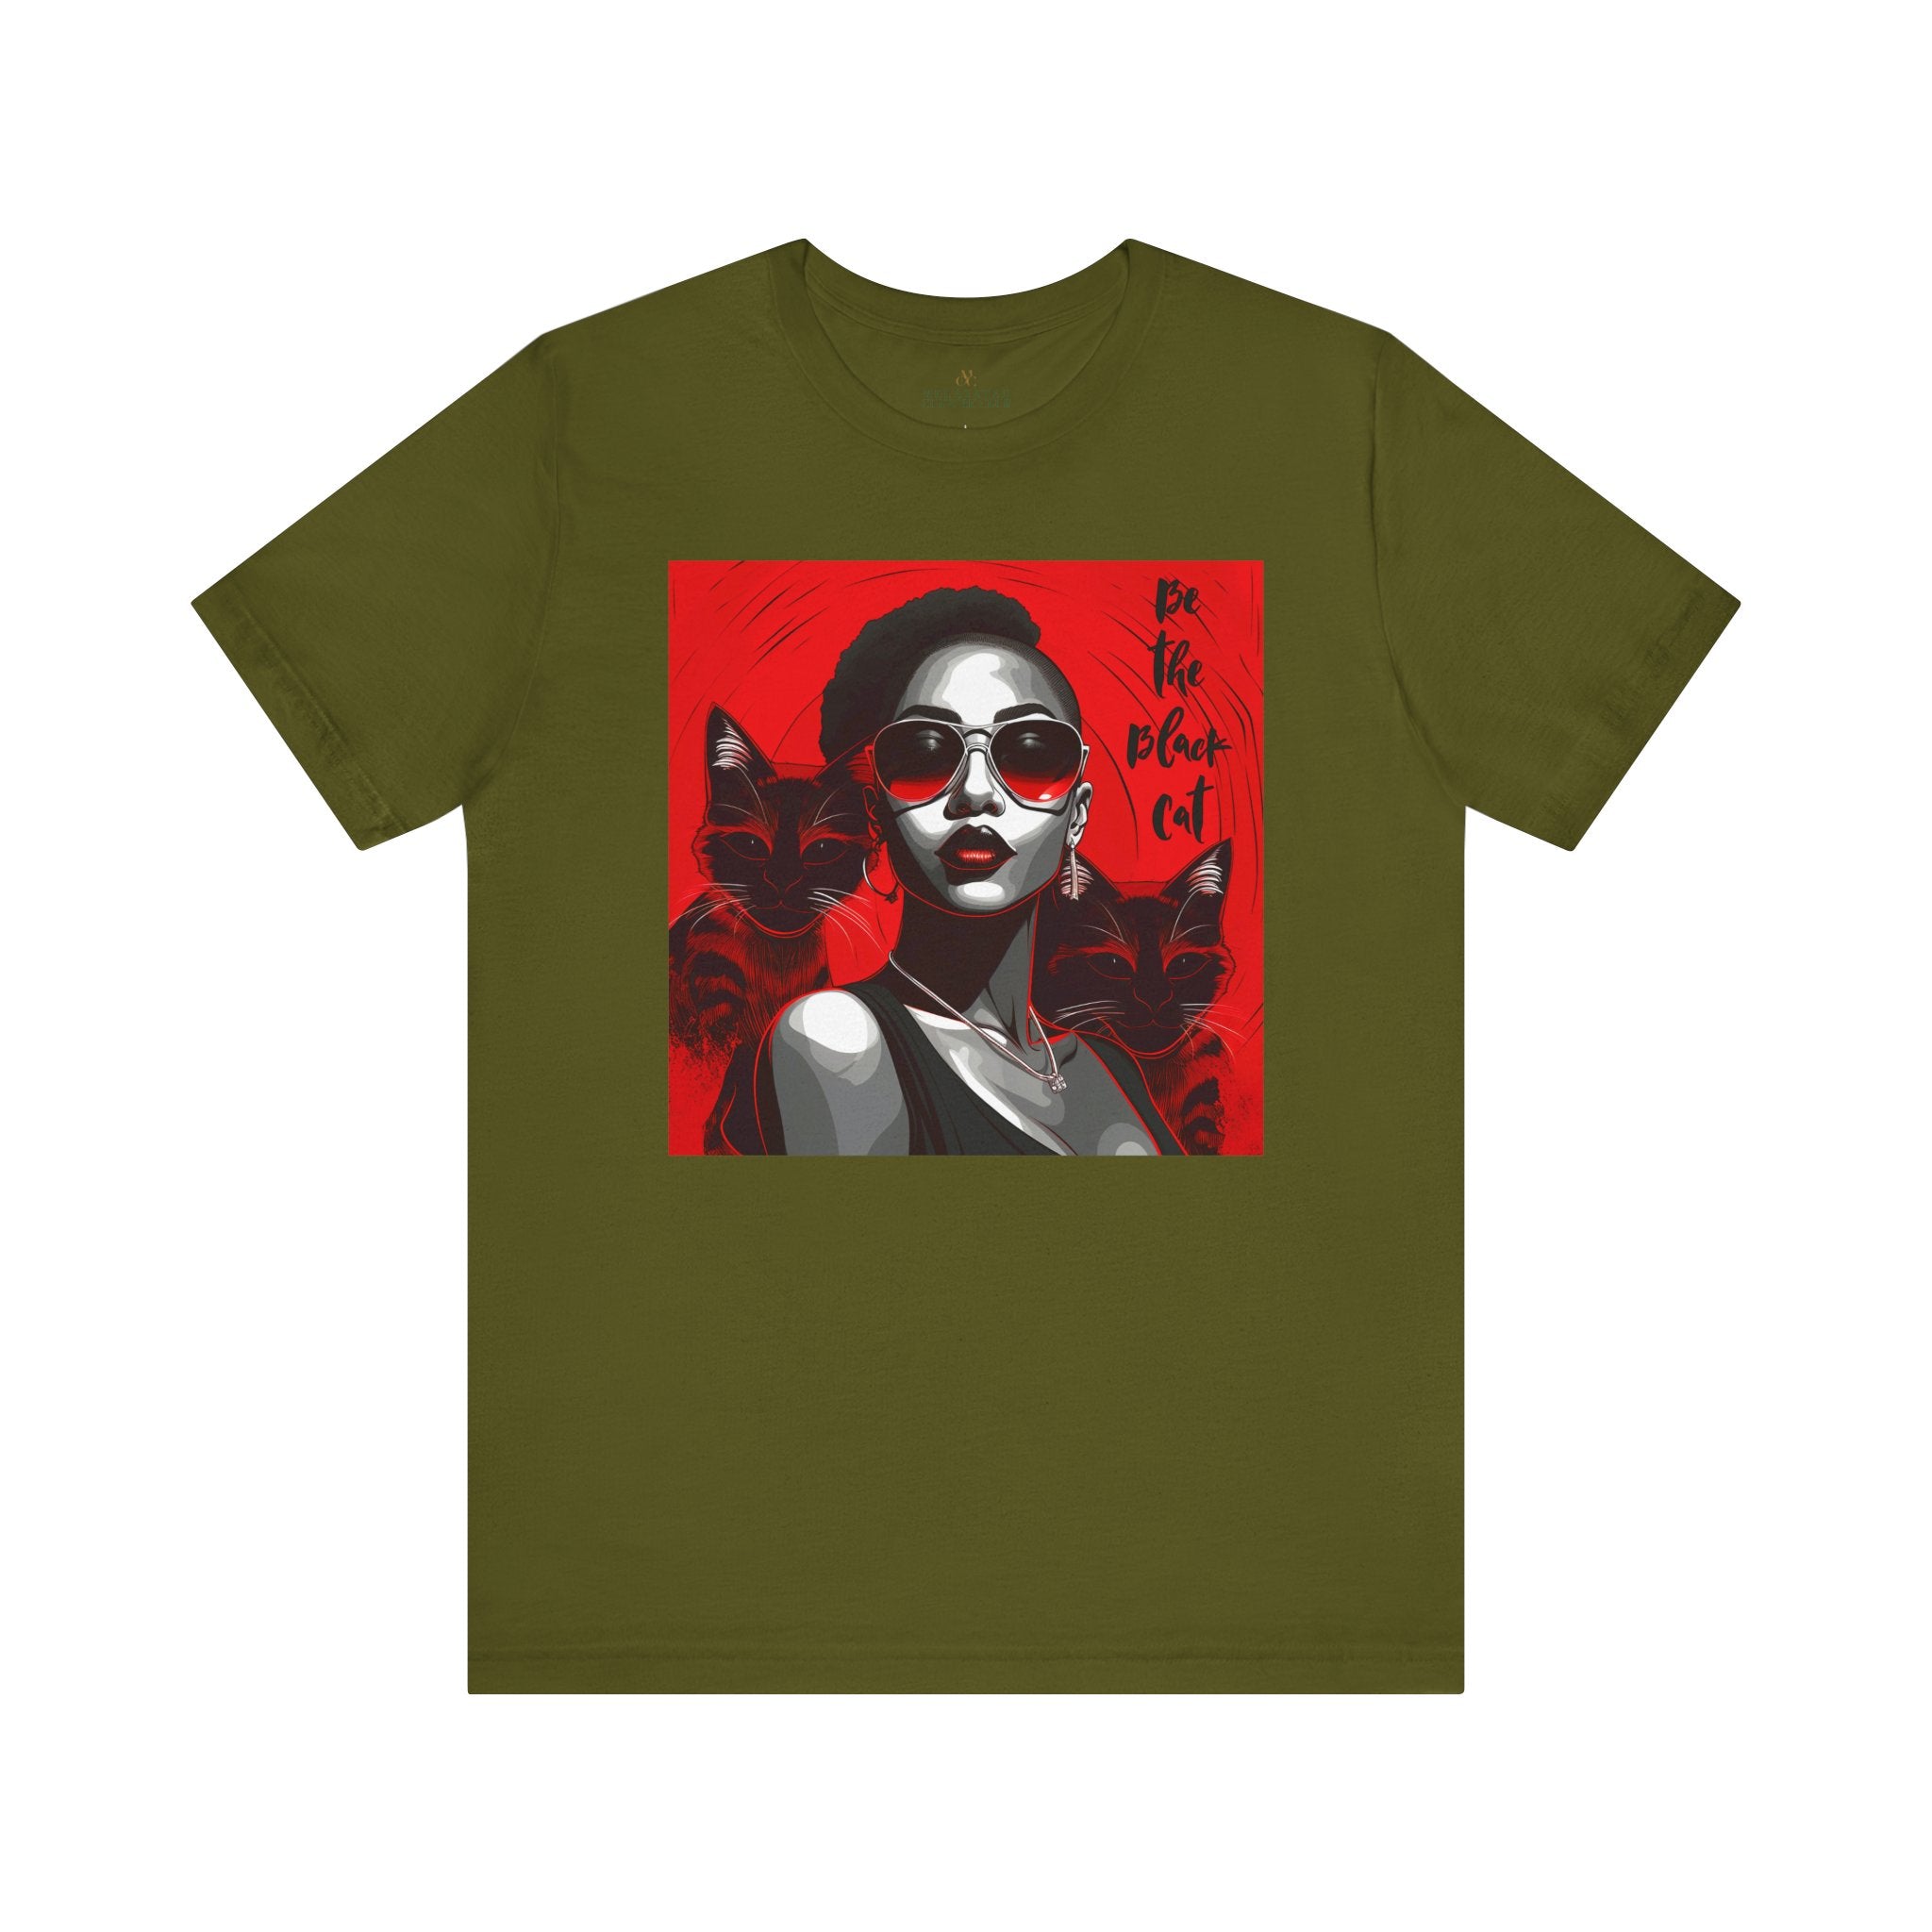 Black Woman Be the Black Cat Tee Shirt in olive.